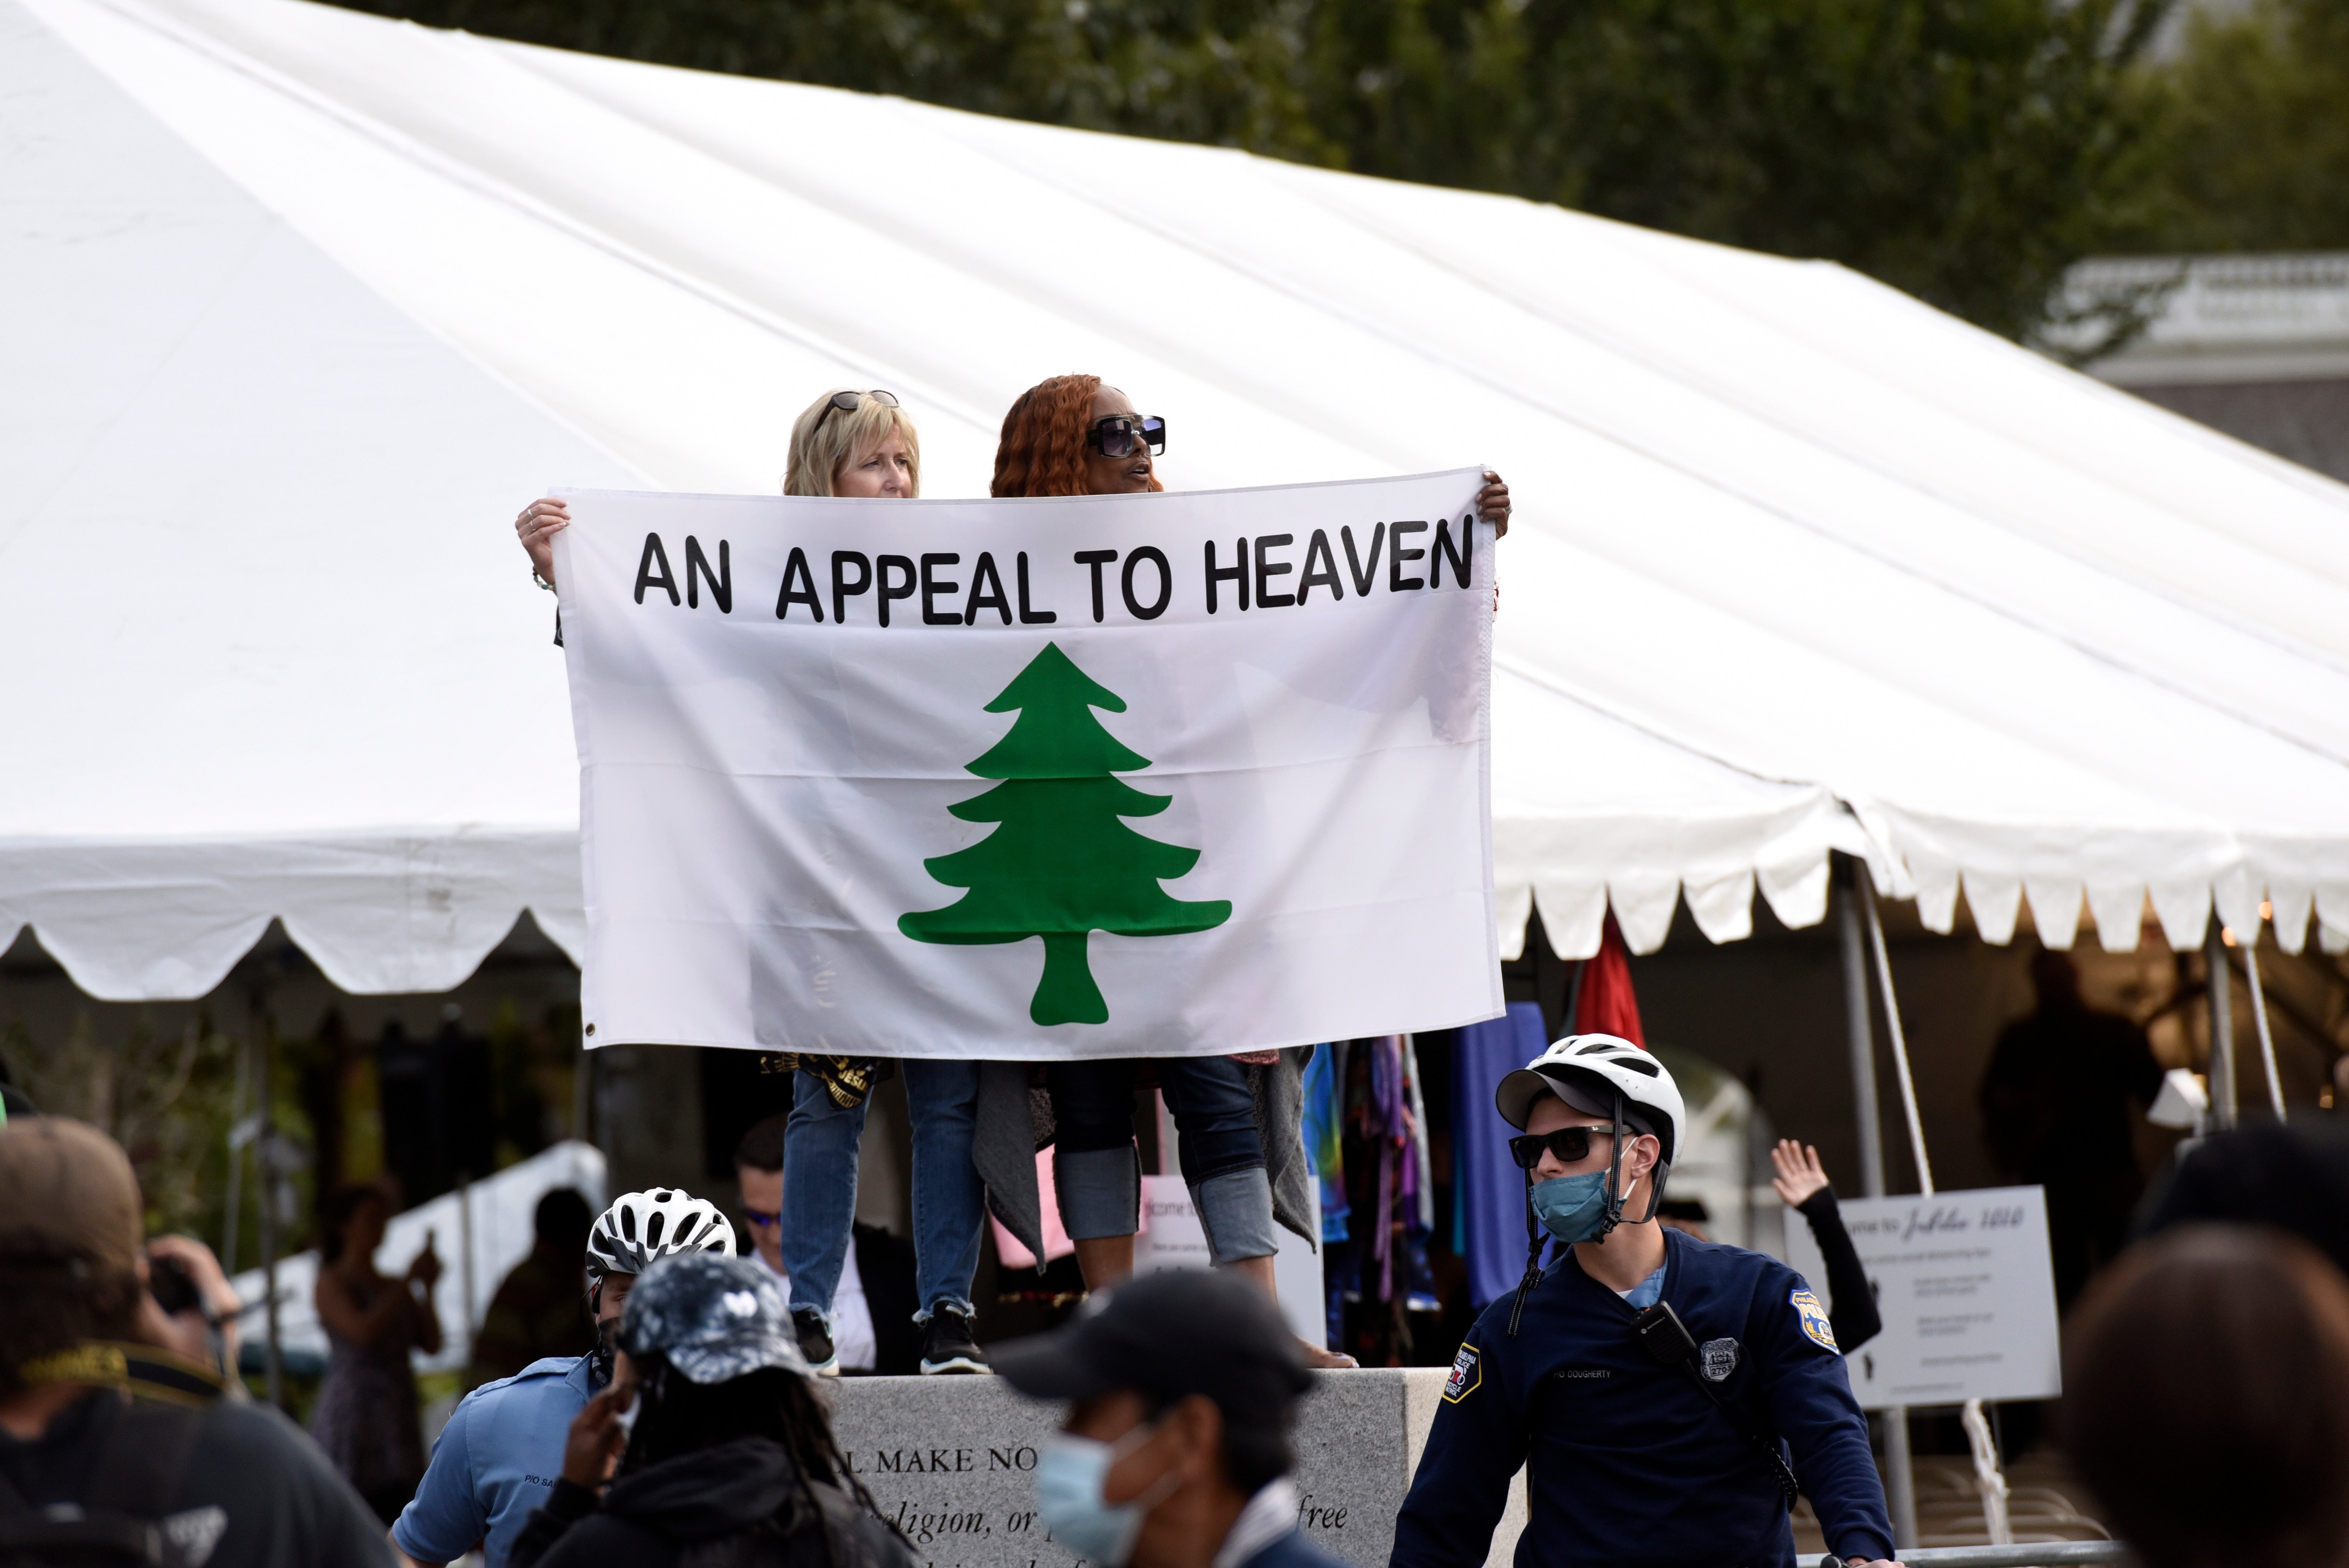 People carry an "Appeal To Heaven" flag as they gather at Independence Mall to support President Donald Trump during a visit to the National Constitution Center to participate in the ABC News town hall, Sept. 15, 2020, in Philadelphia